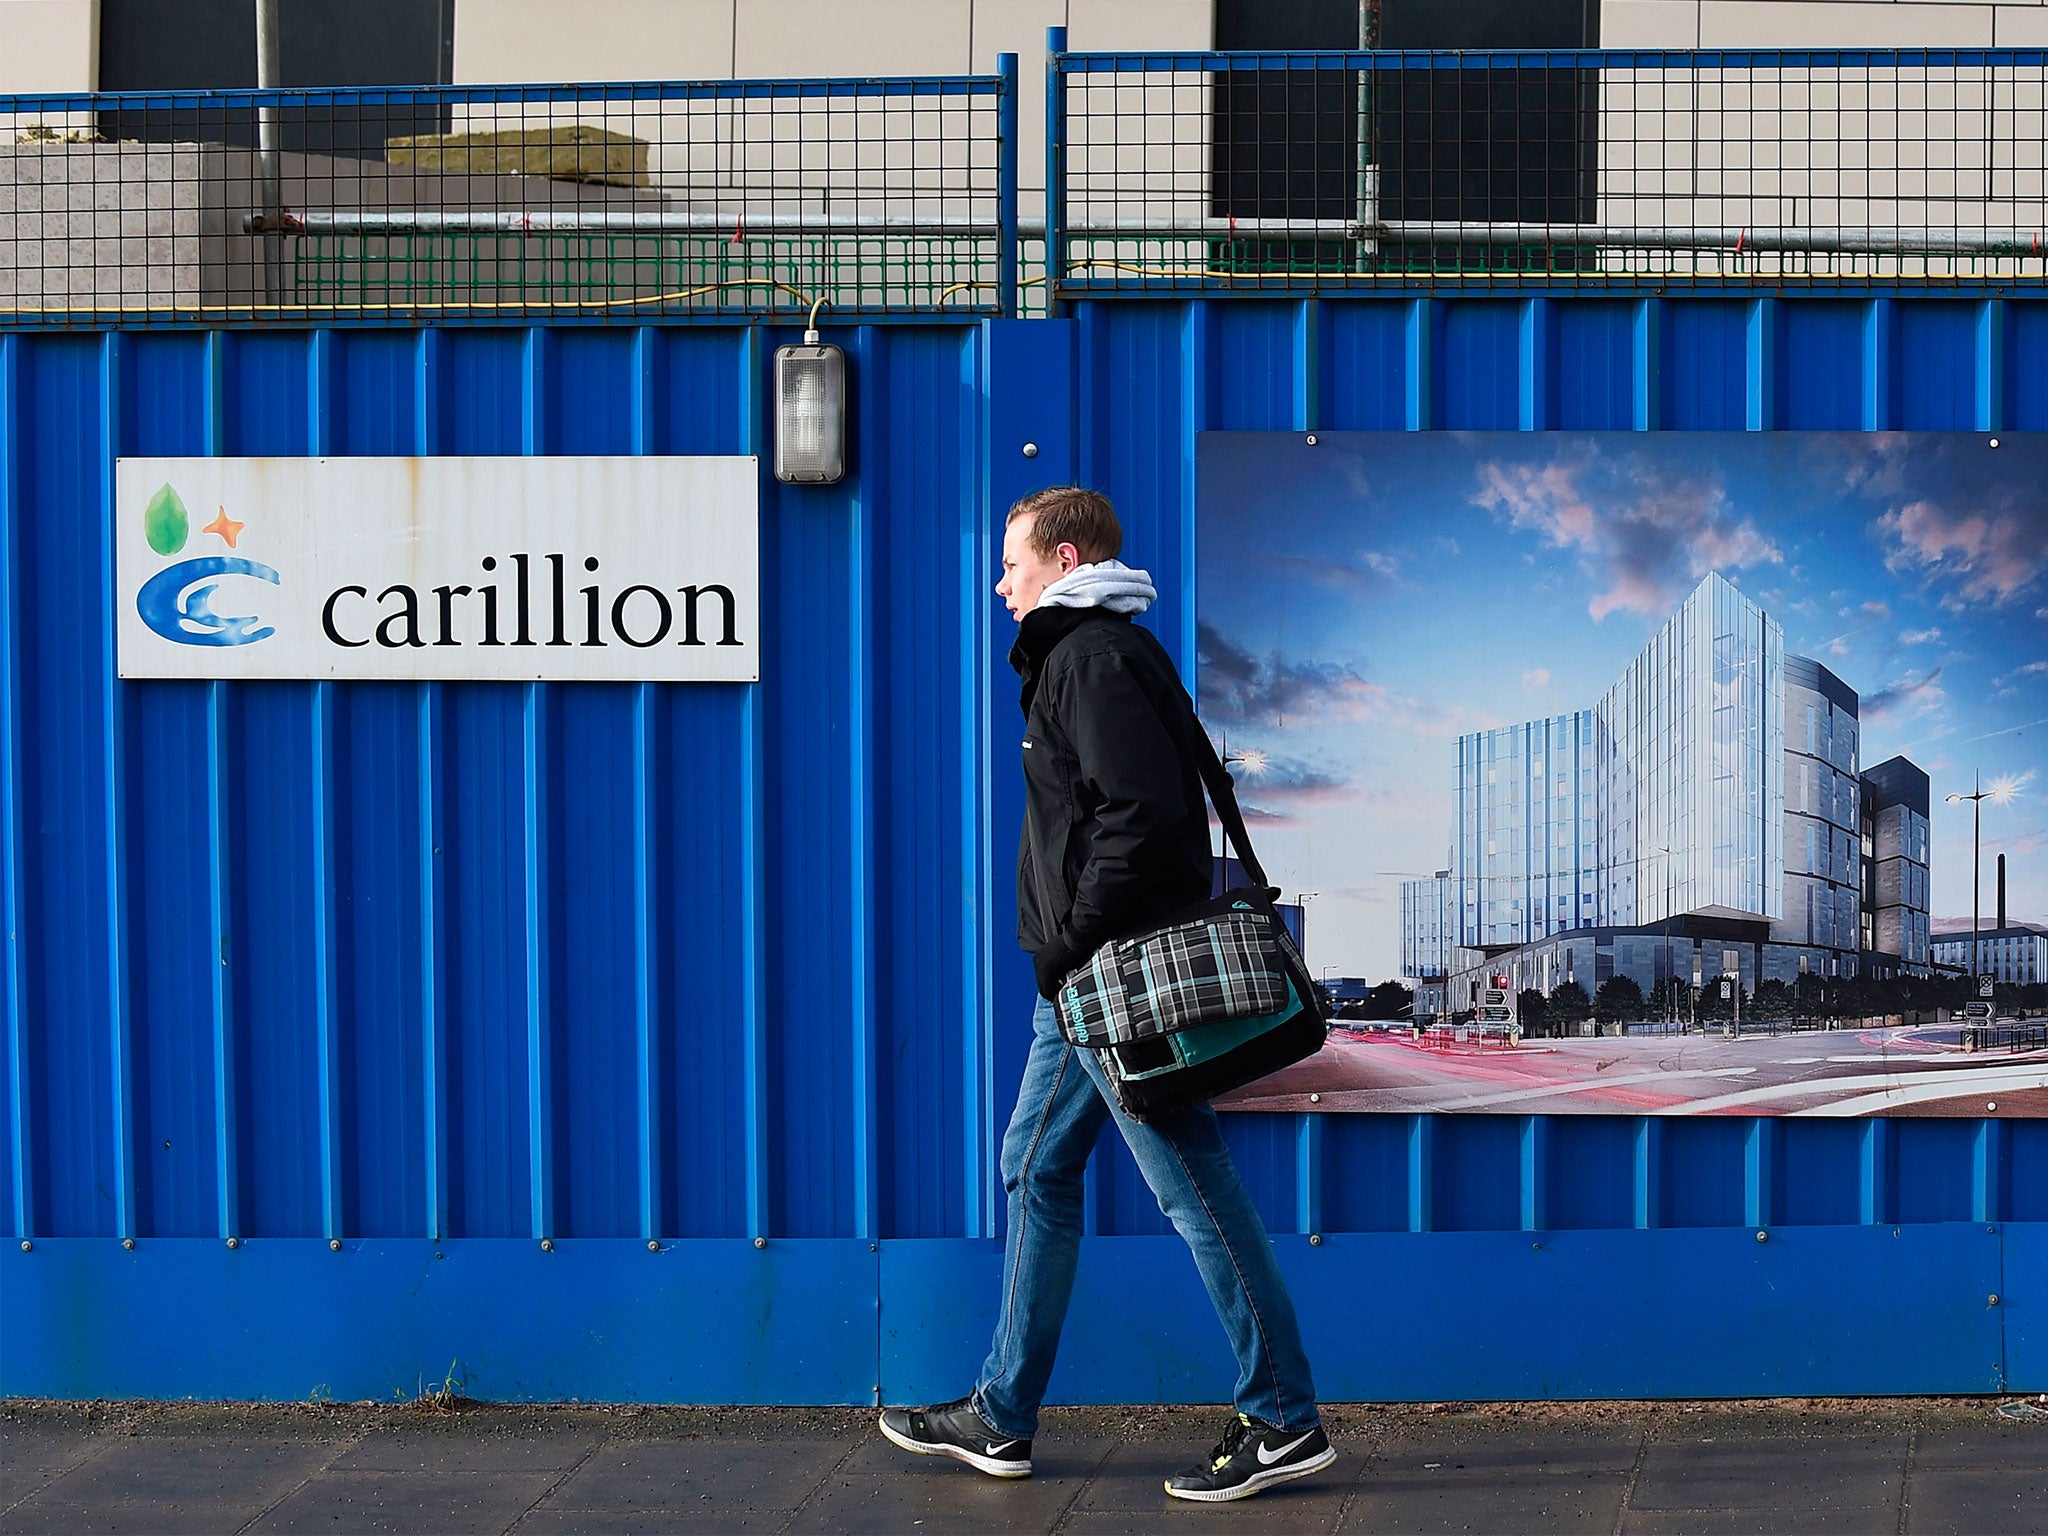 Carillion: The failed outsourcer's payment practices have been sharply criticised by MPs